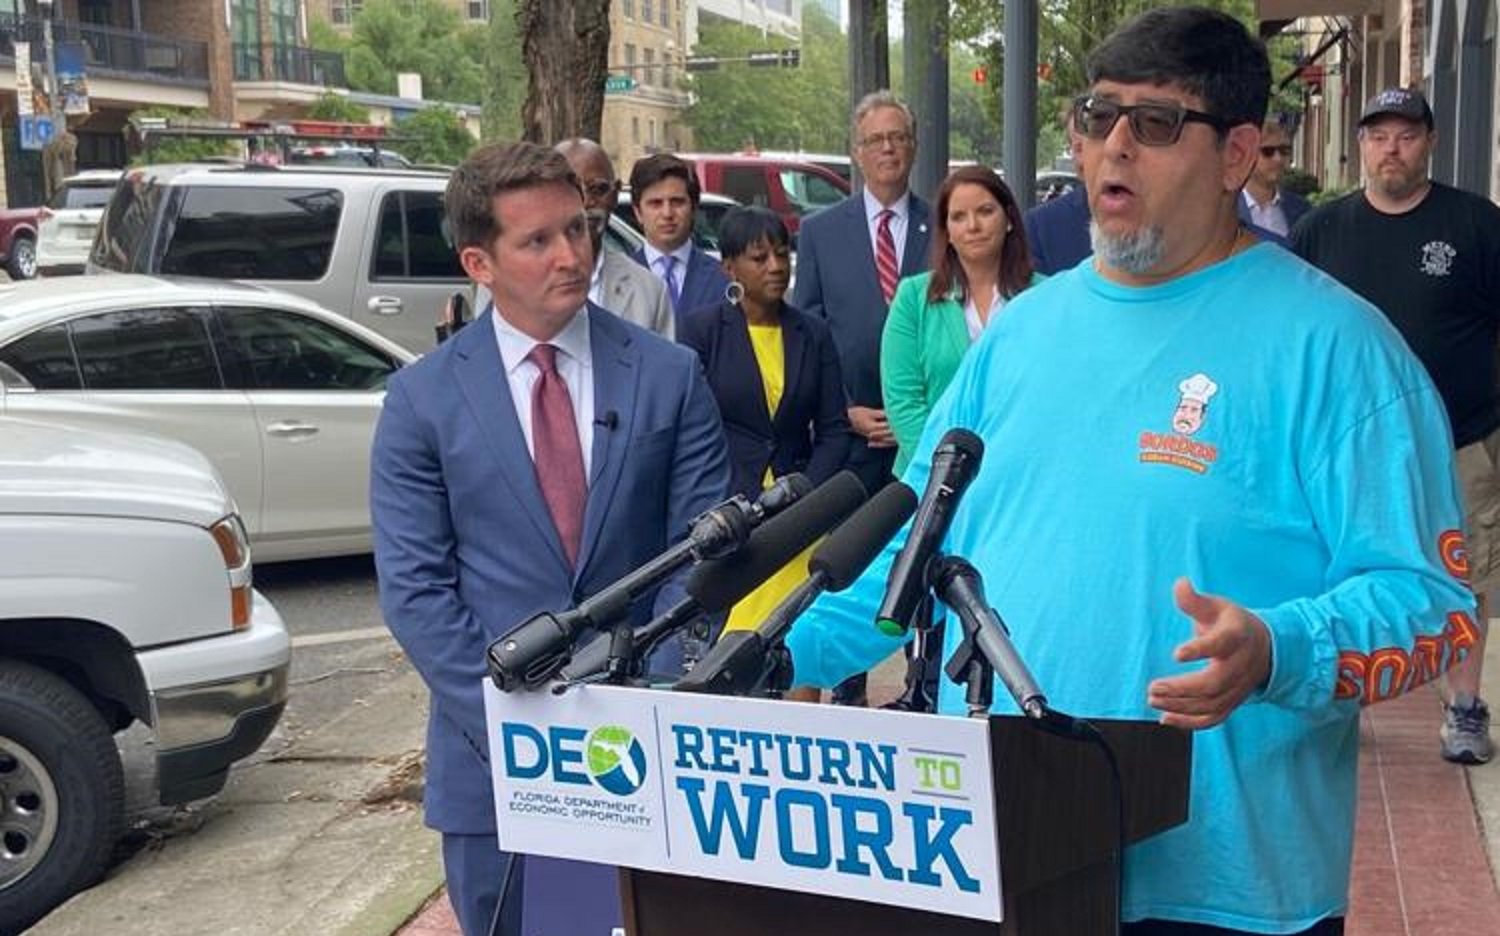 Department of Economic Opportunity Secretary Dane Eagle and Tallahassee restaurant owner Eddie Agramonte appeared at a May news conference about efforts to boost the workforce.